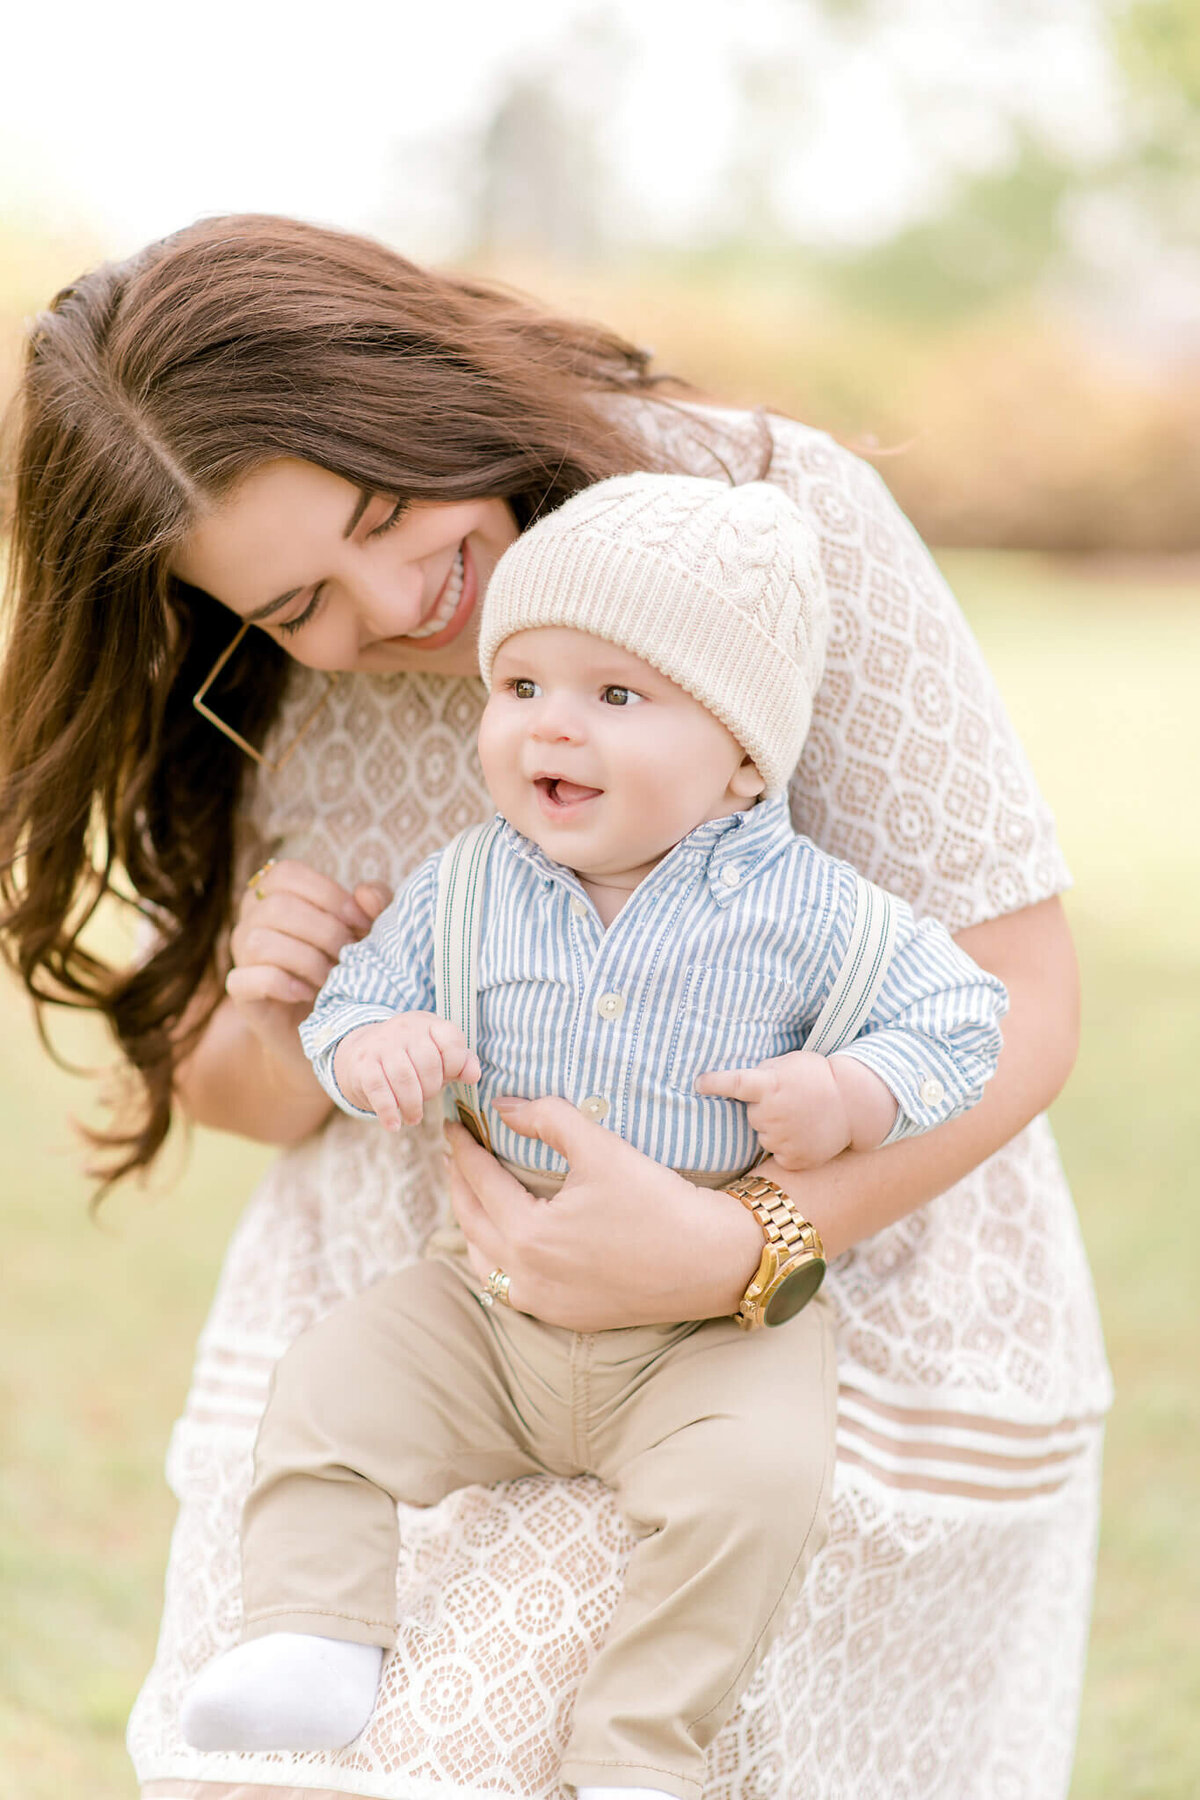 A gorgeous brunette mother looks sweetly at her young baby as he smiles.